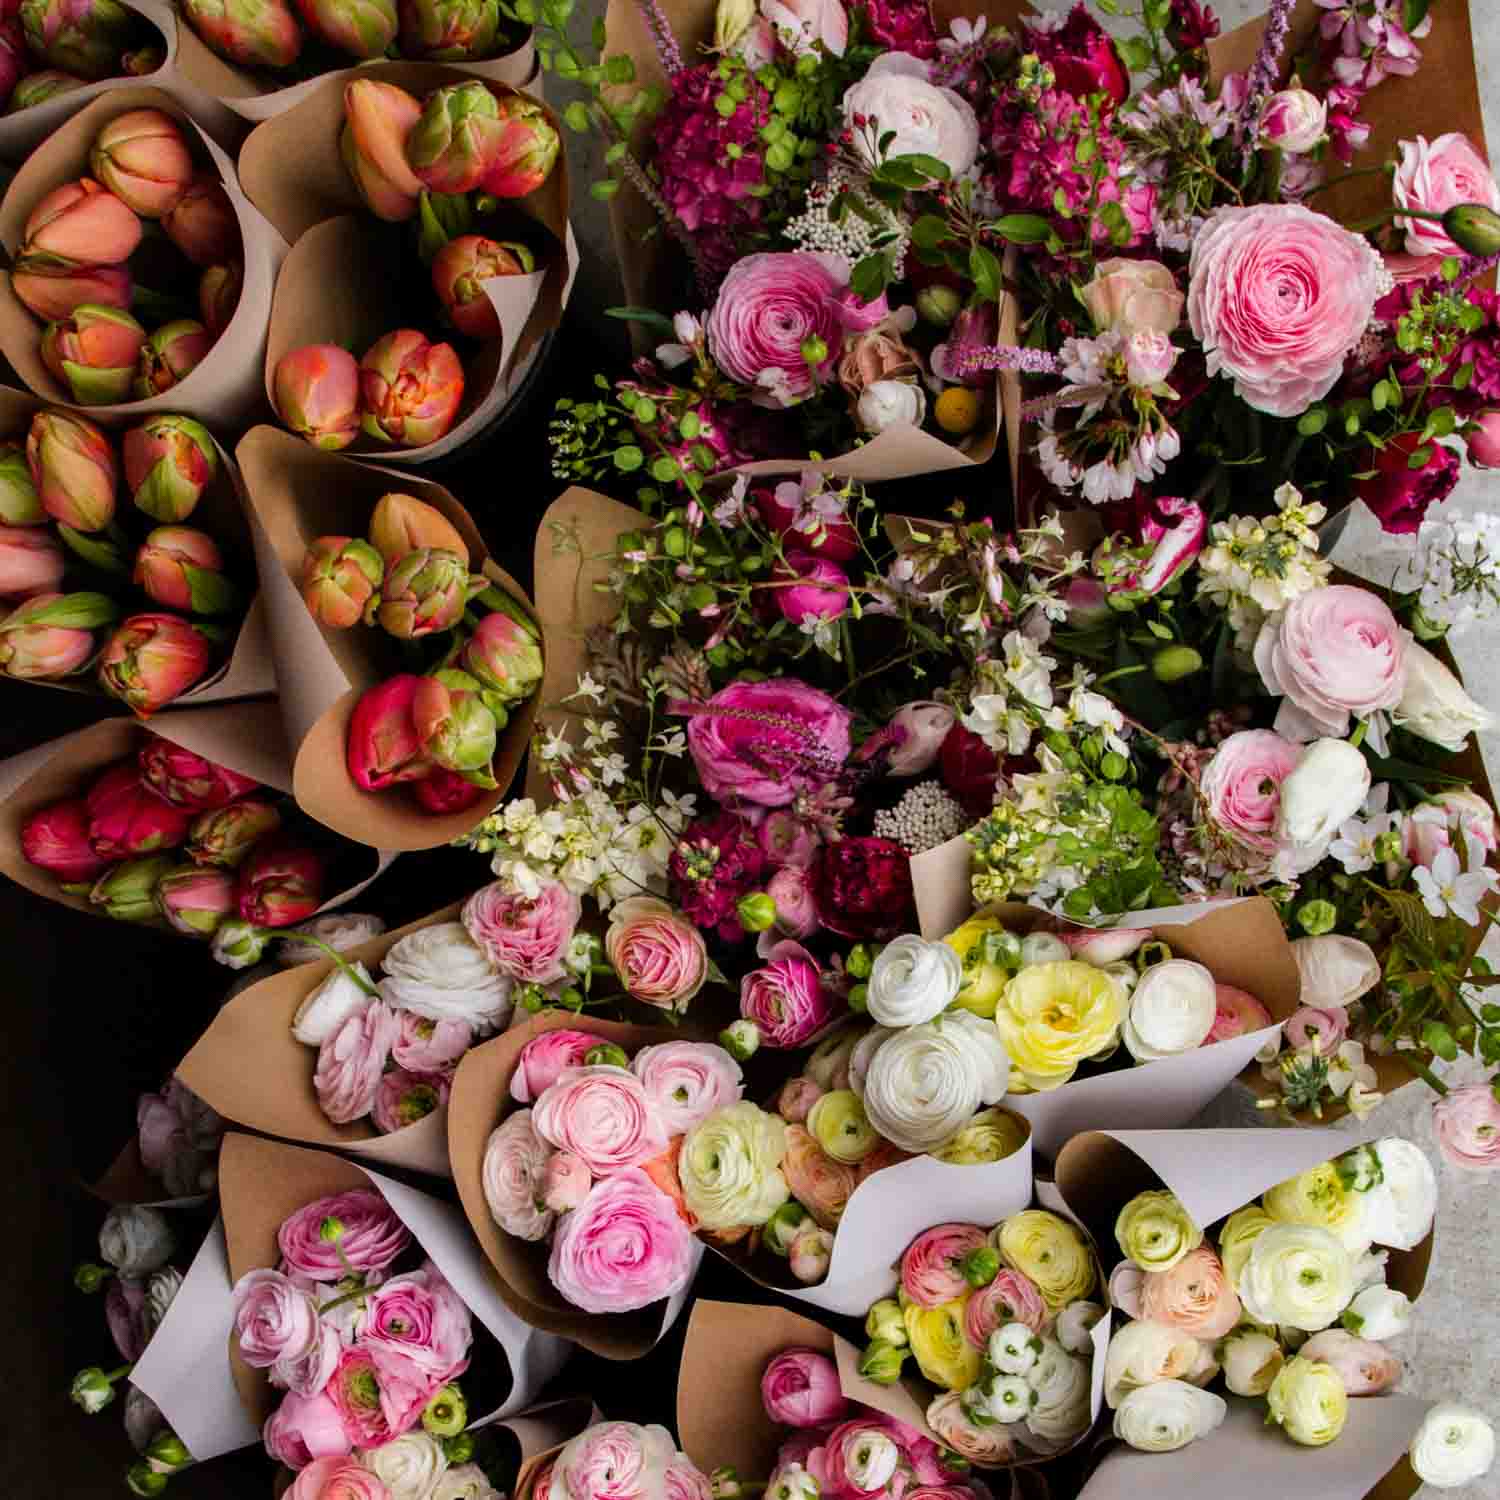 GROW Flowers for Retail Florists - Saturday 10 August